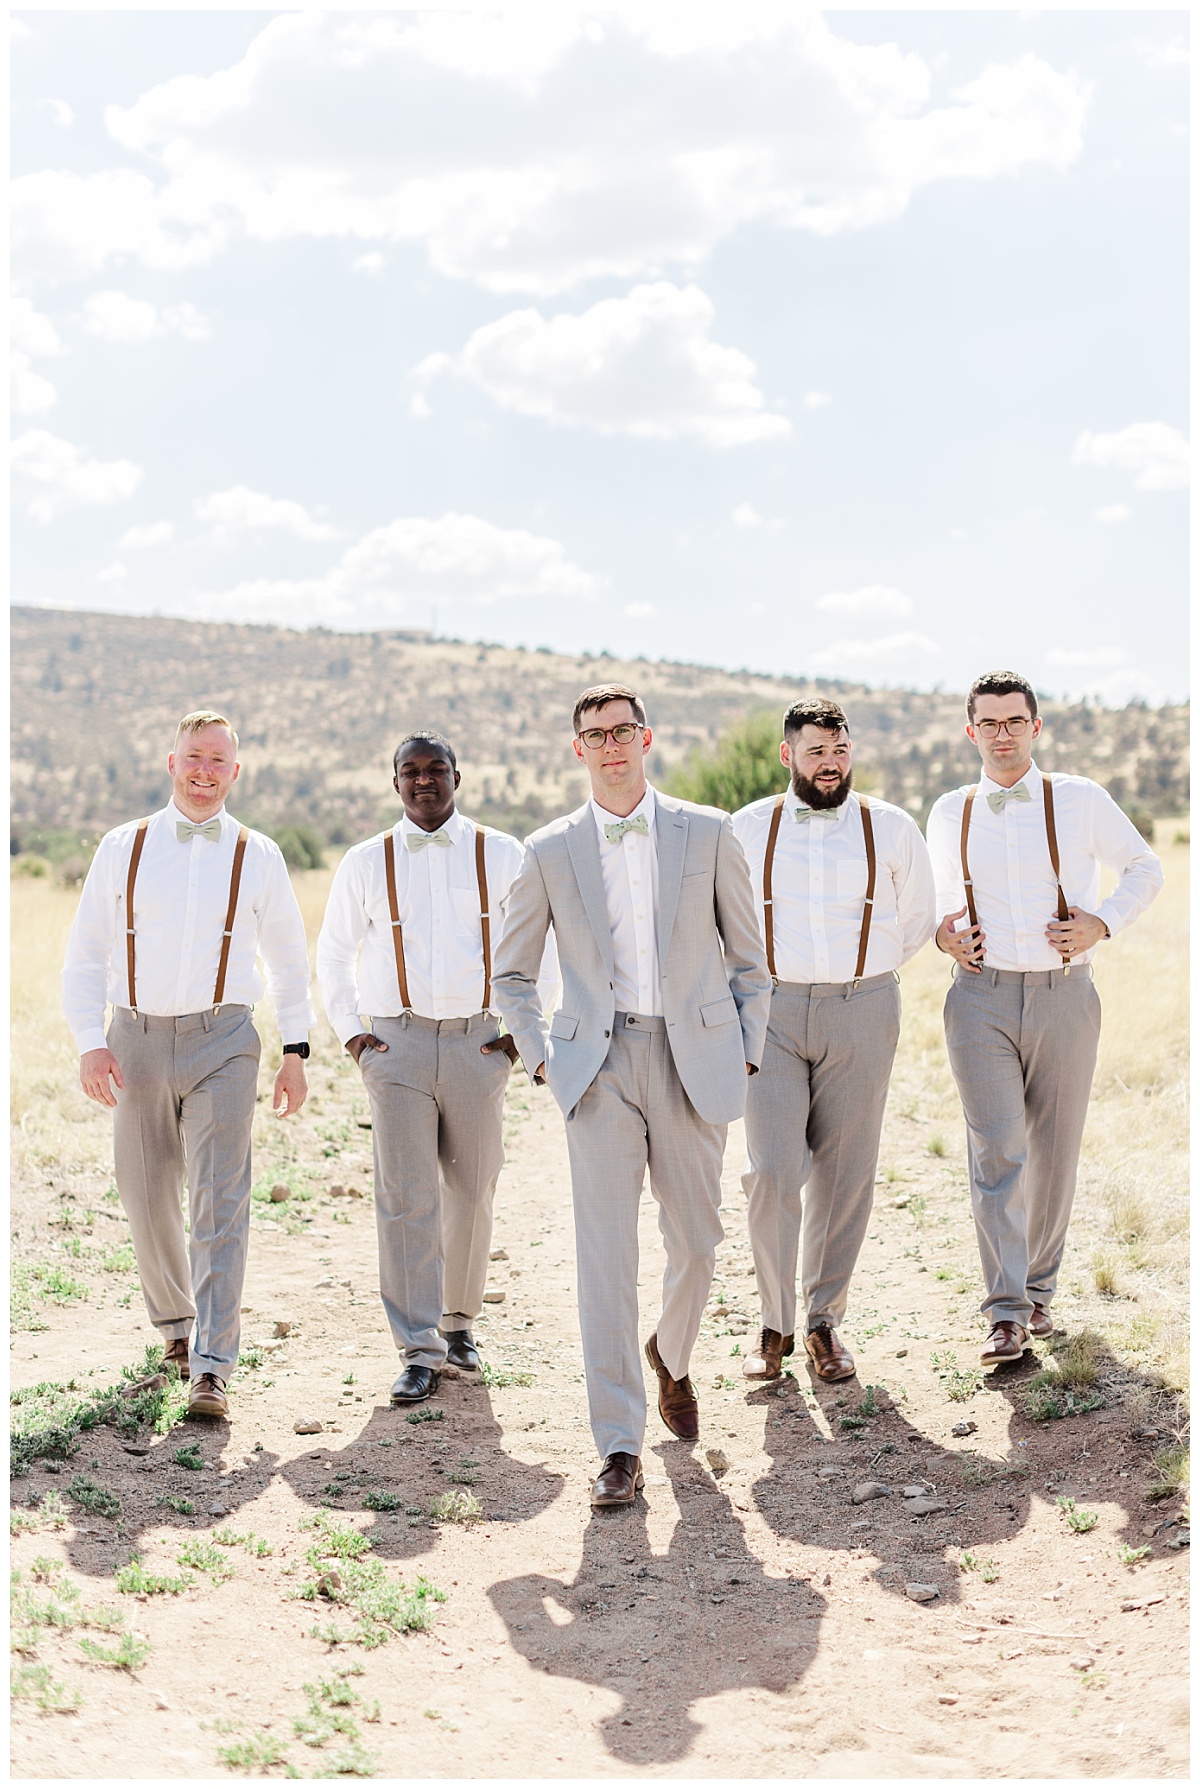 Jake with his four groomsmen in their gray suits